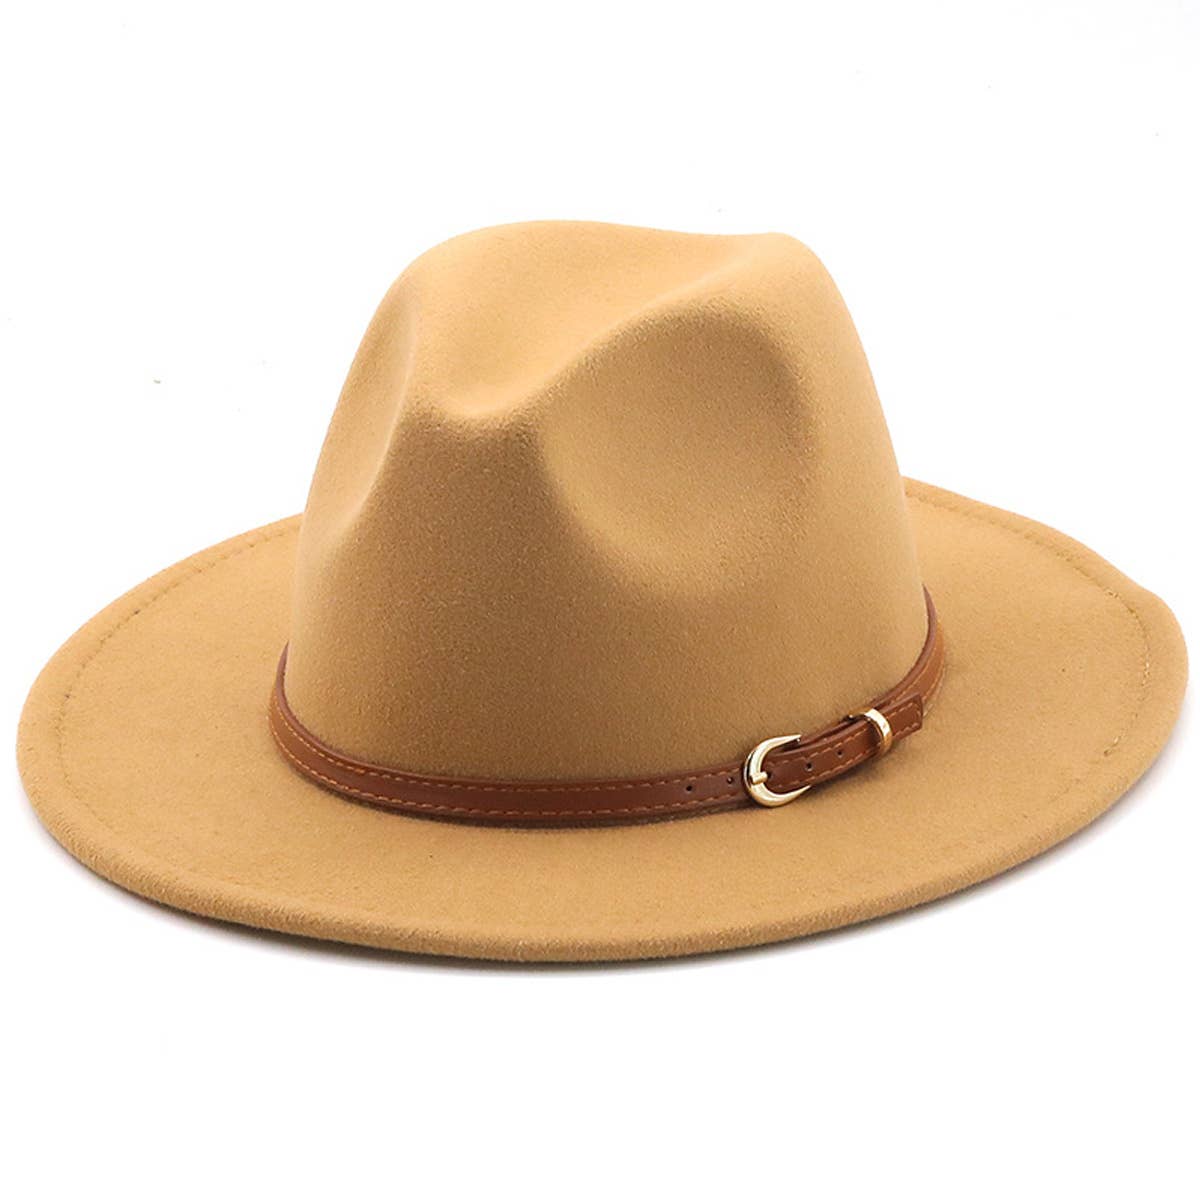 Bailey Fedora Hat with Belt